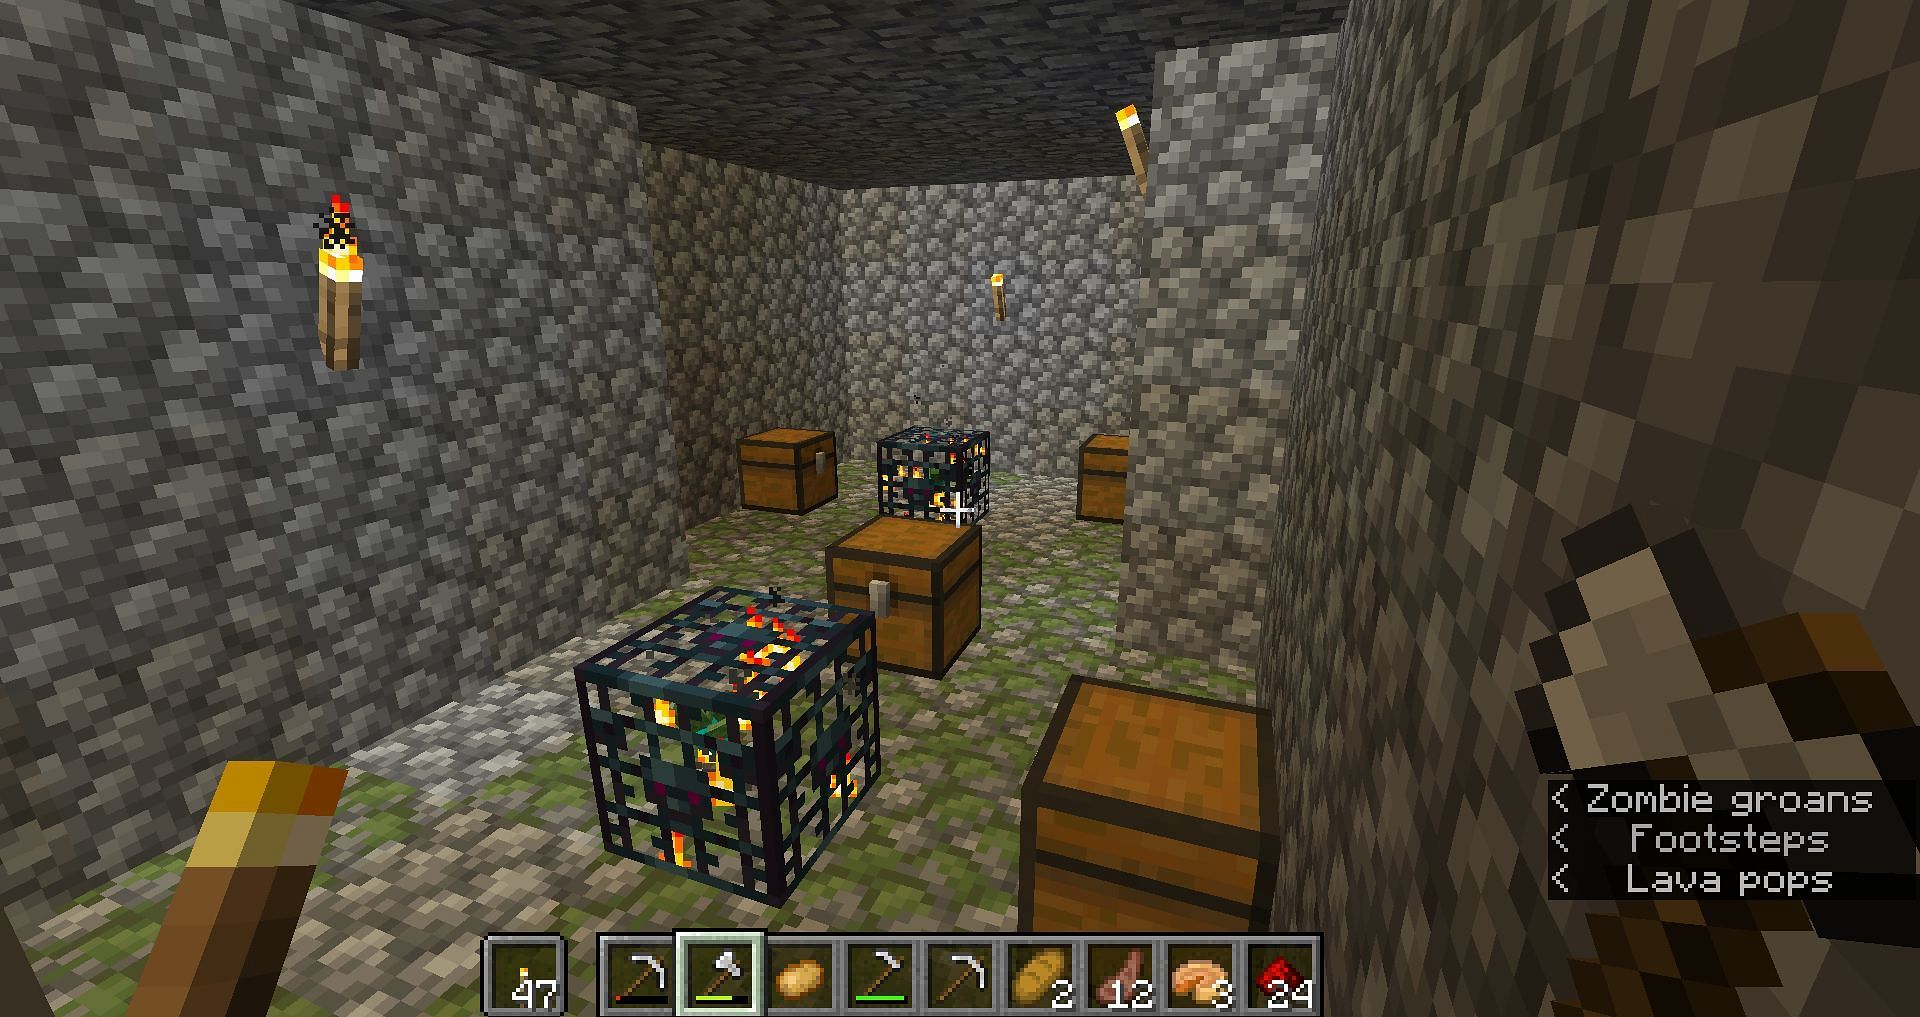 Two zombie spawners for the price of one (Image via u/LordofSnails/Reddit)